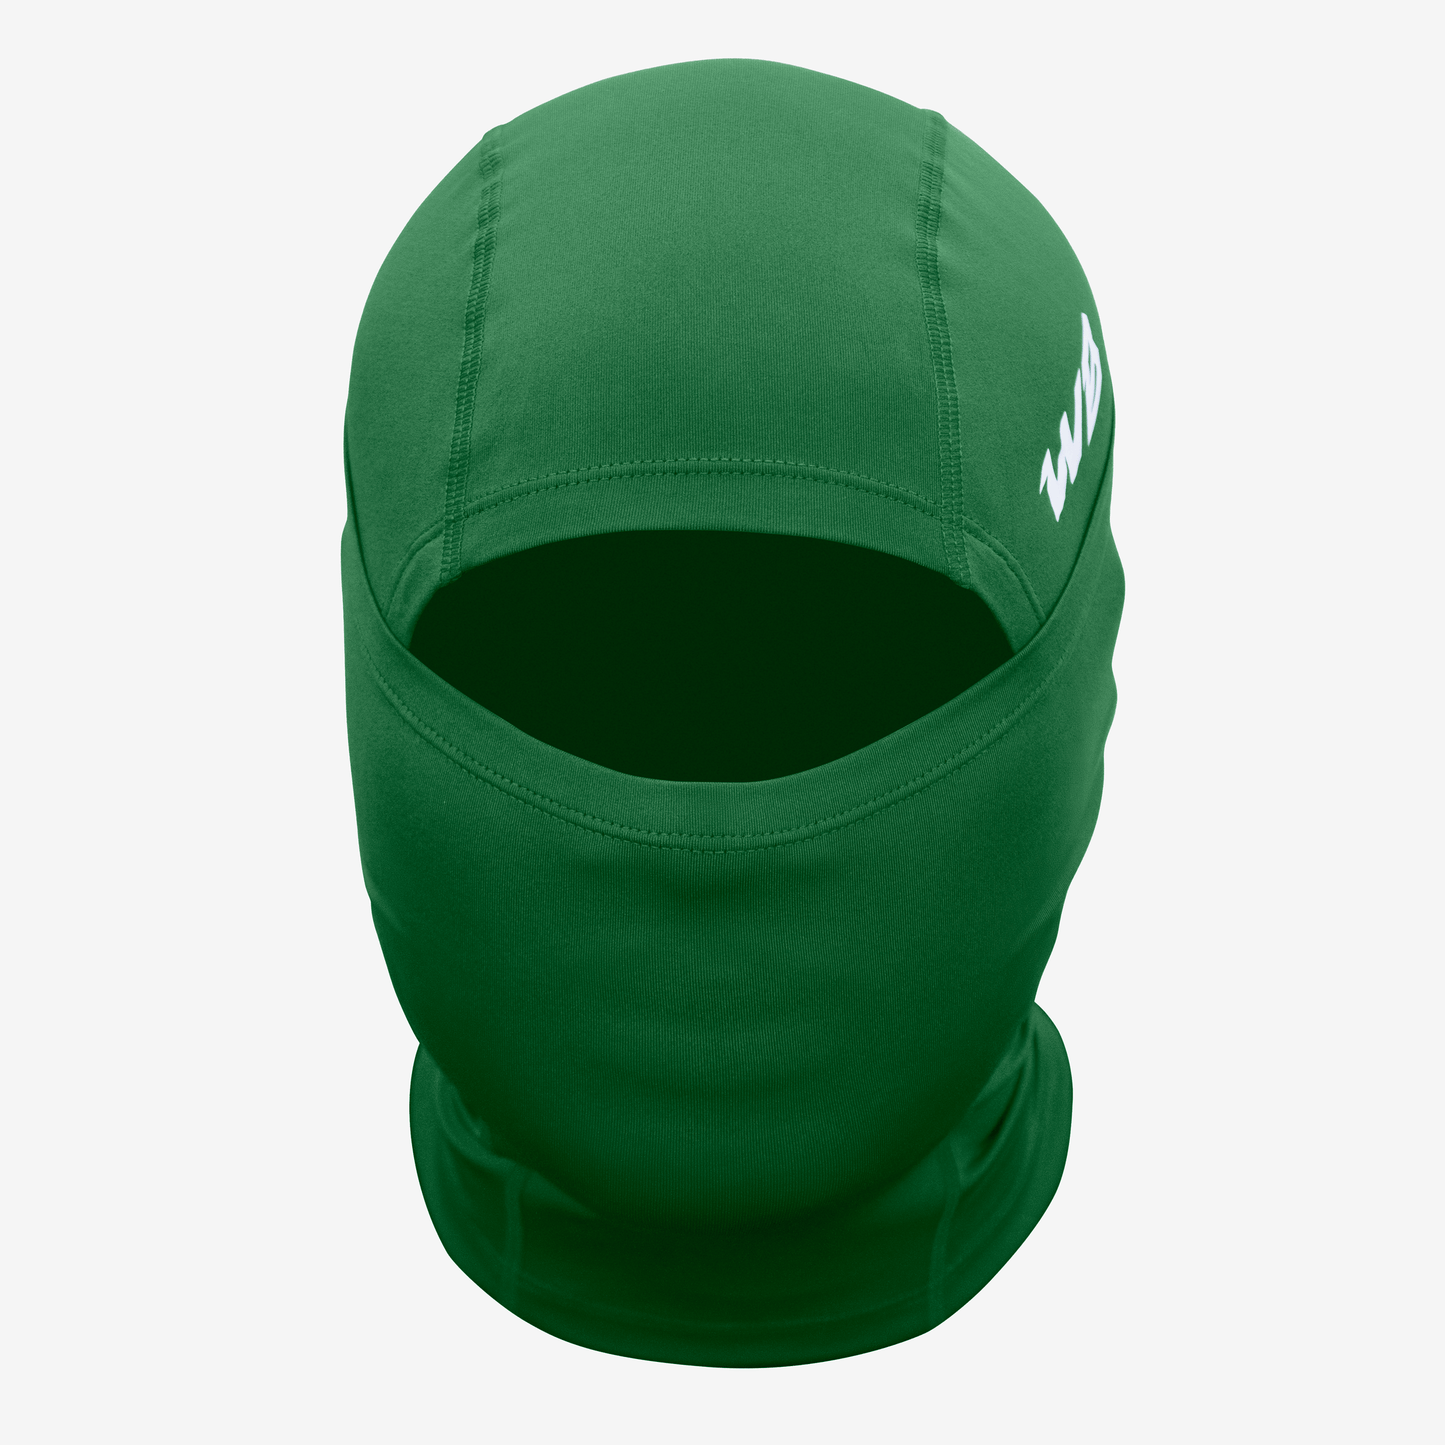 ADULT SKI MASK 2.0 (FOREST GREEN) - We Ball Sports